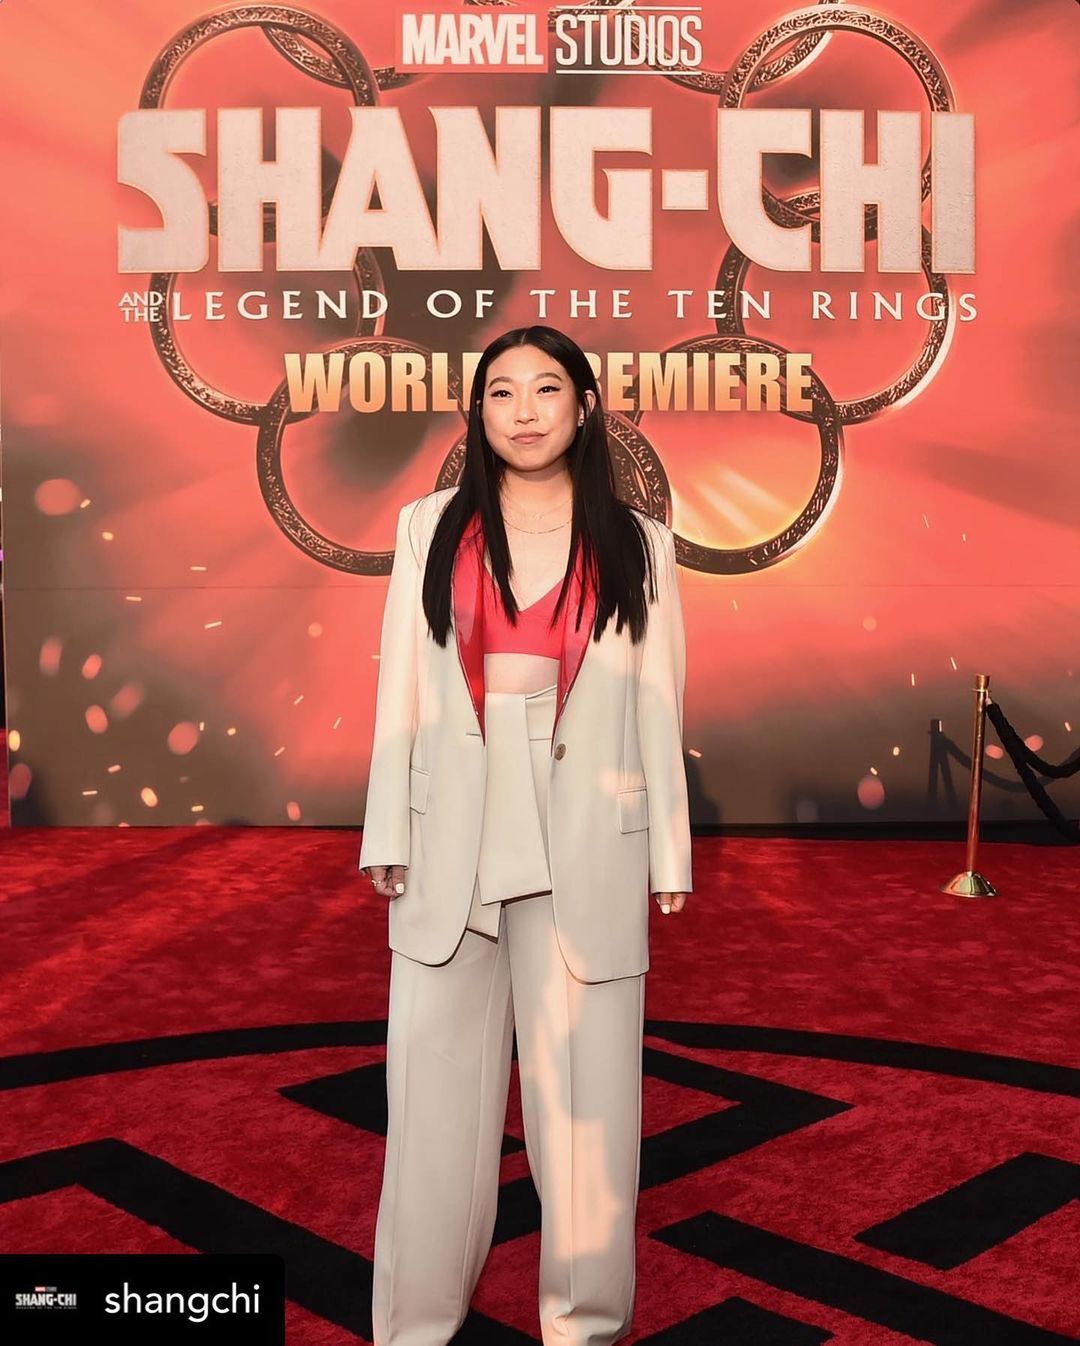 Awkwafina thinks her Shang Chi character is 'a really good friend' and also 'useless': "It’s fun that she gets to tag along"